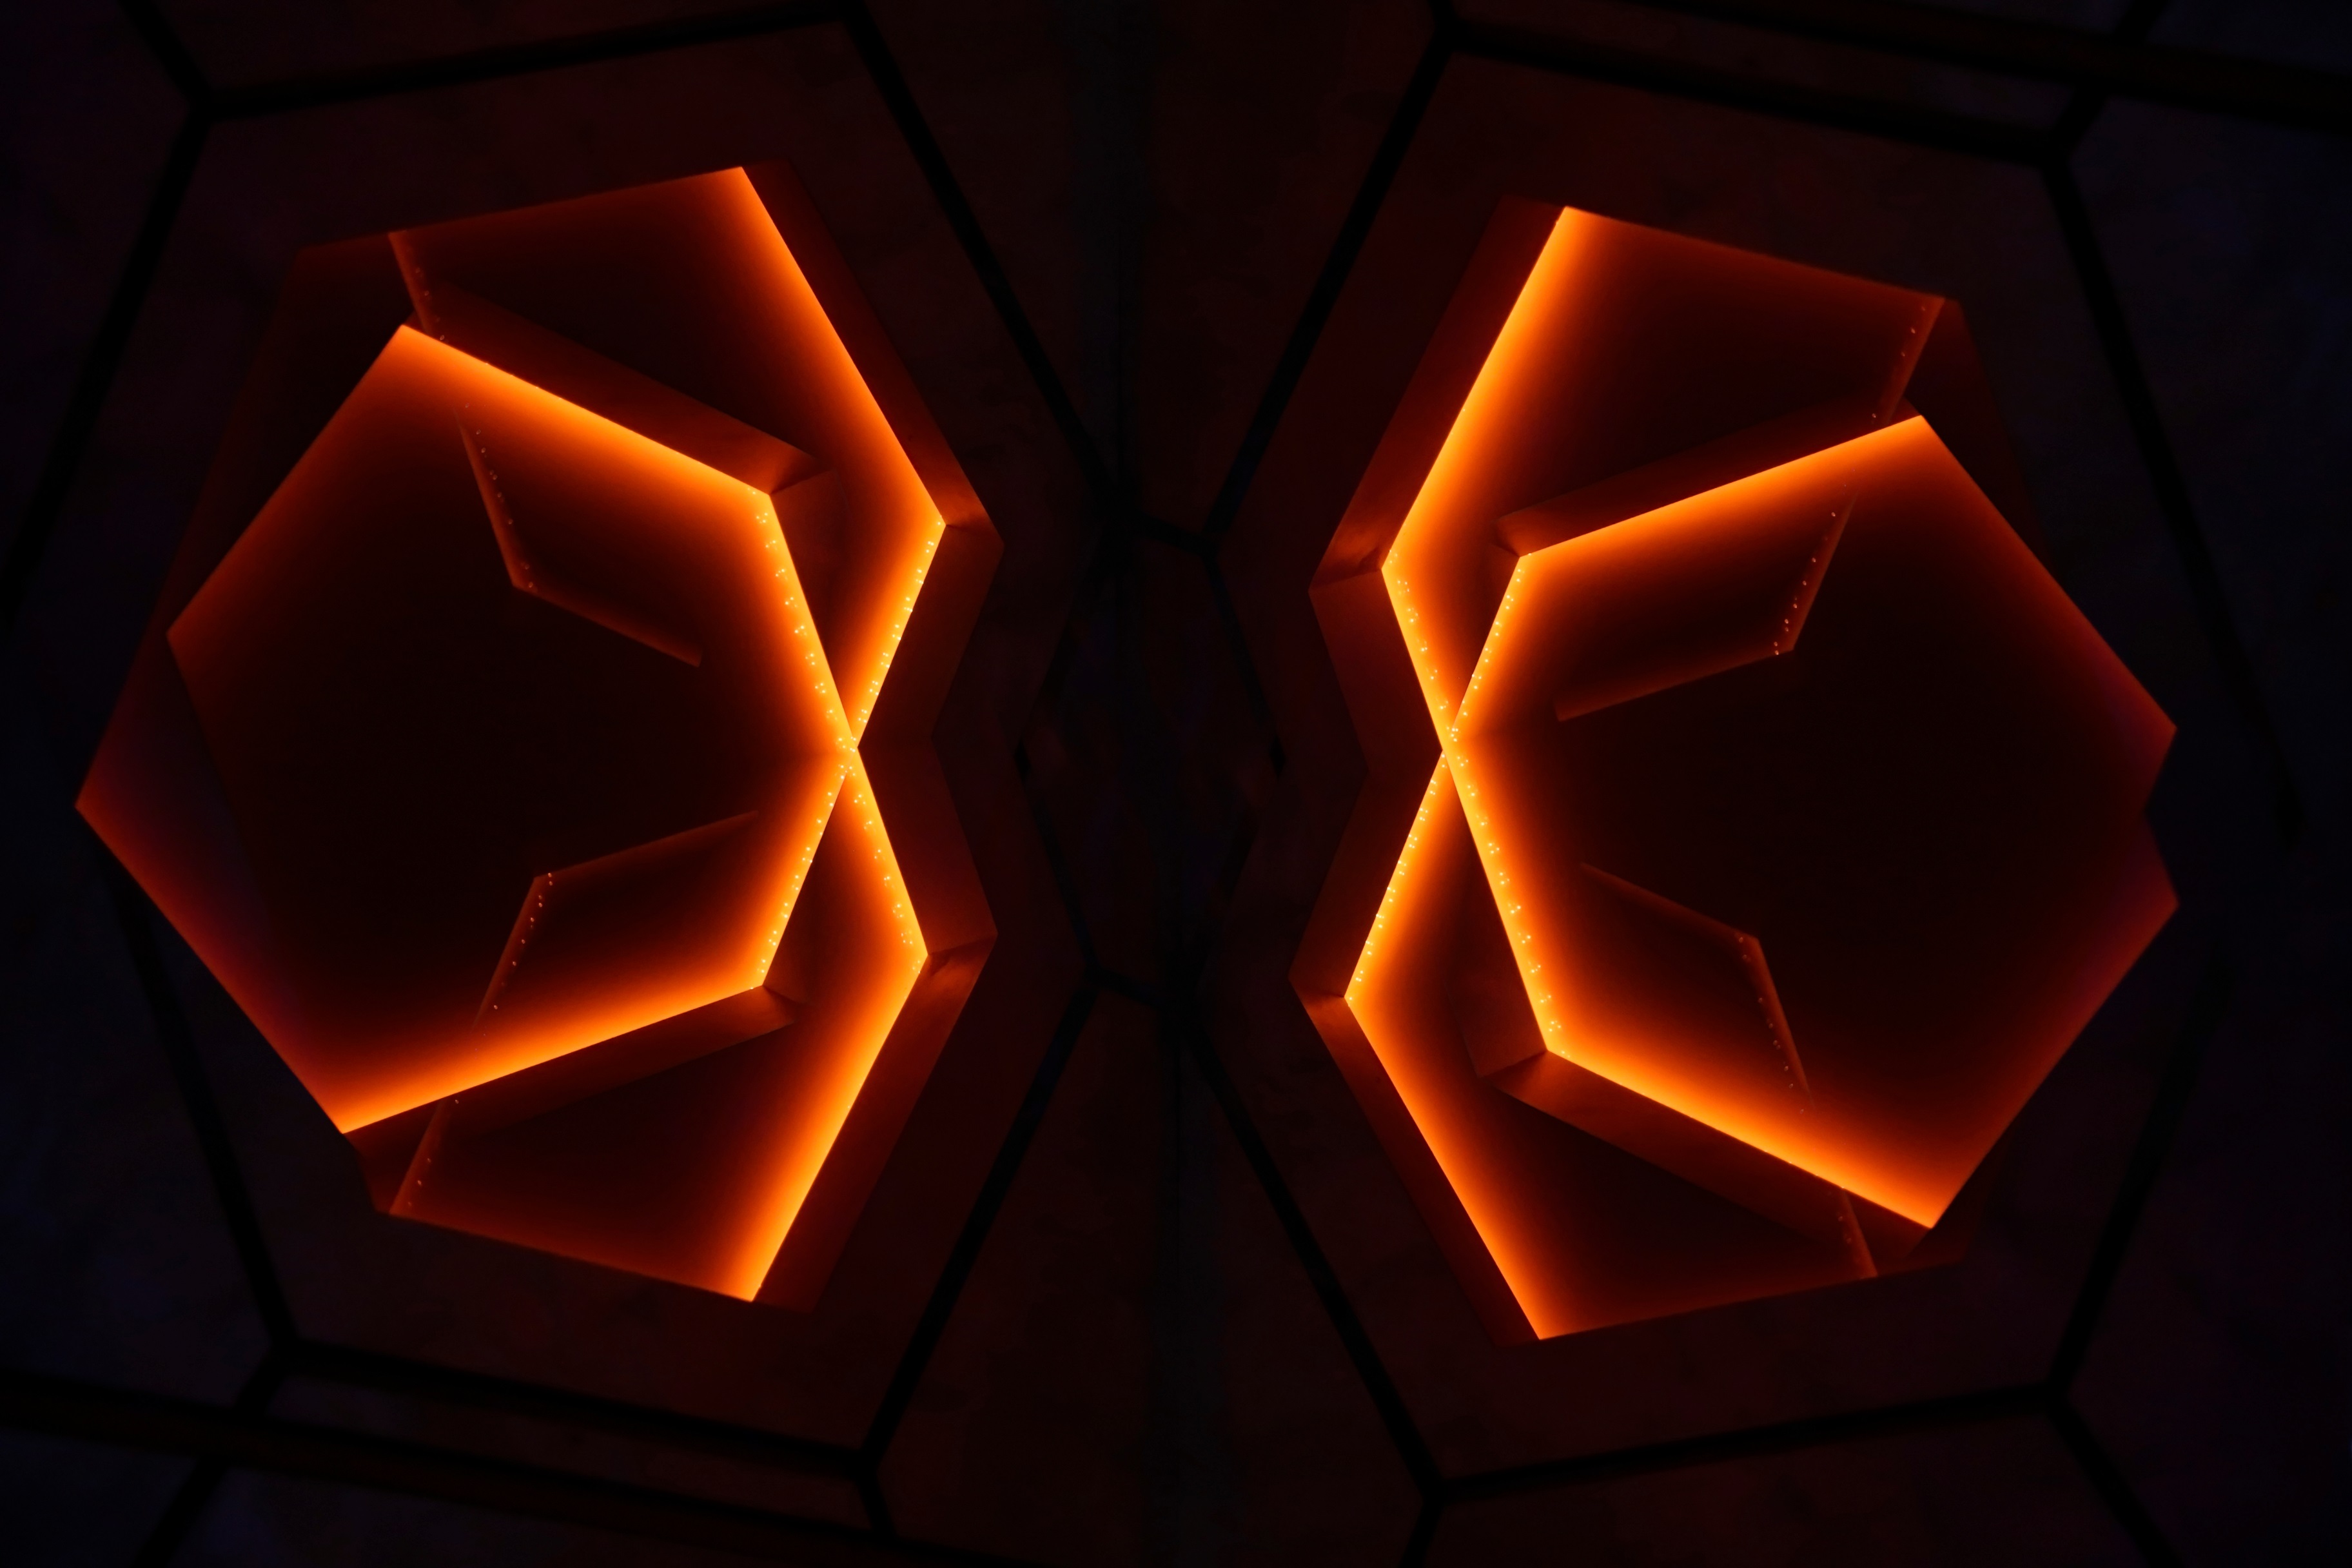 General 3648x2432 abstract 3D Abstract neon lights digital art geometry shapes minimalism dark glowing